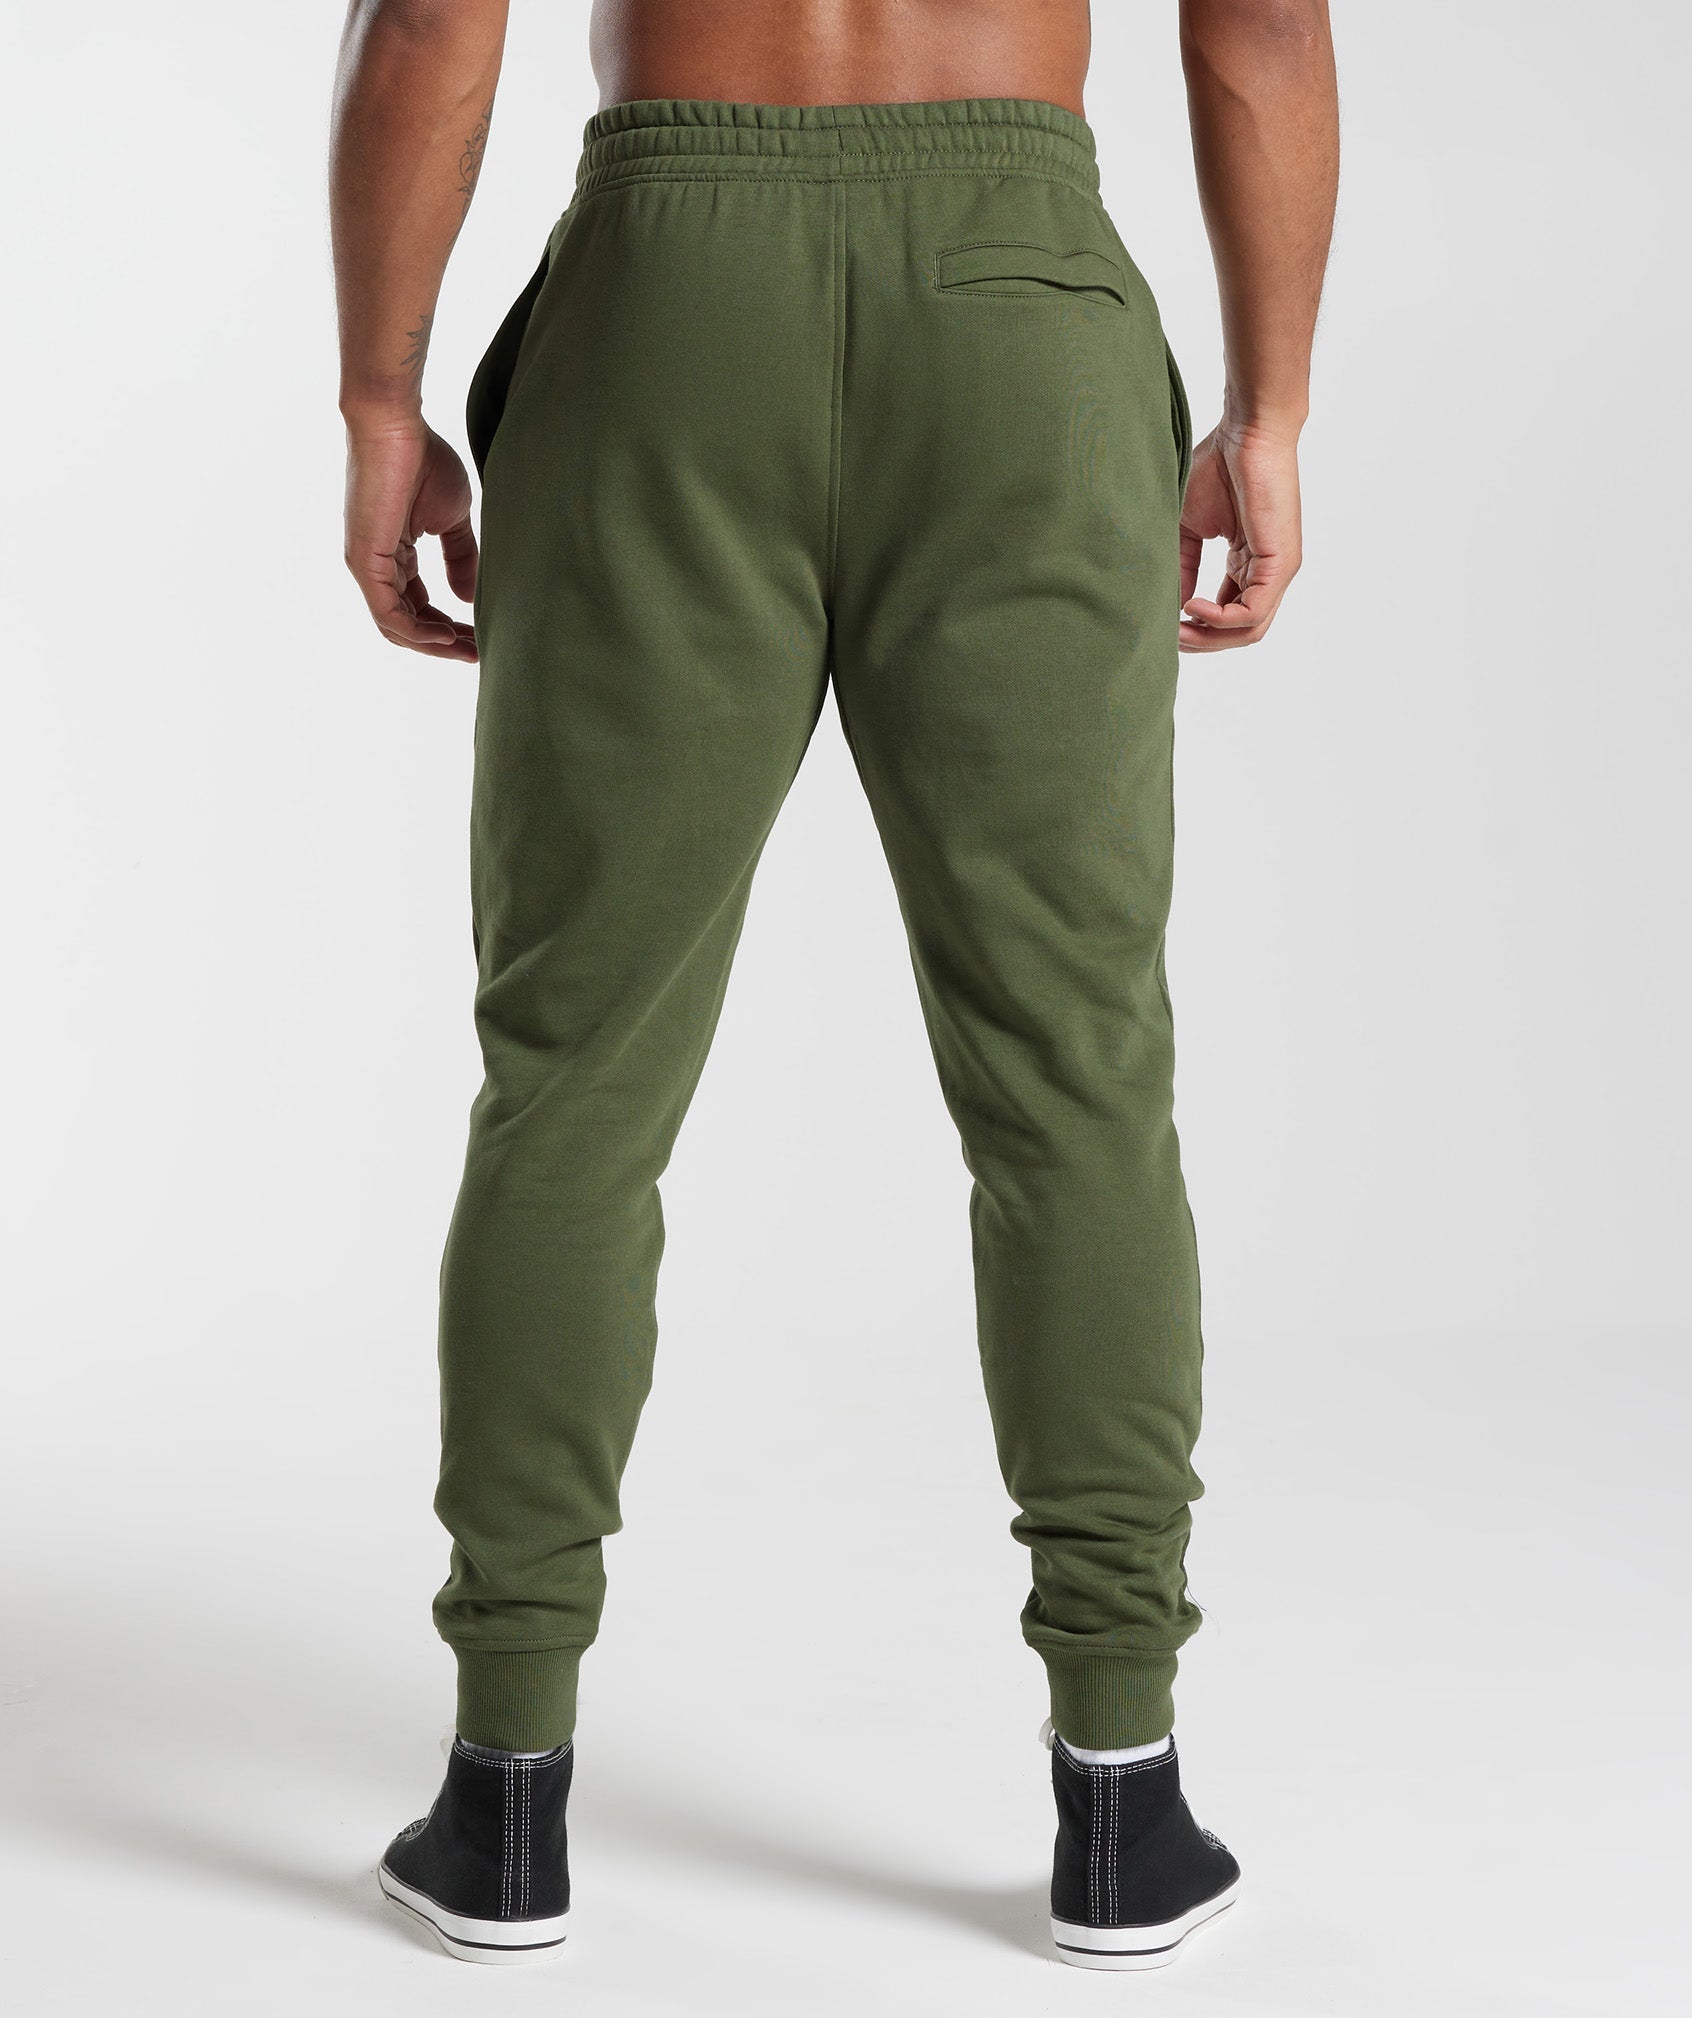 Social Club Joggers in Core Olive - view 2